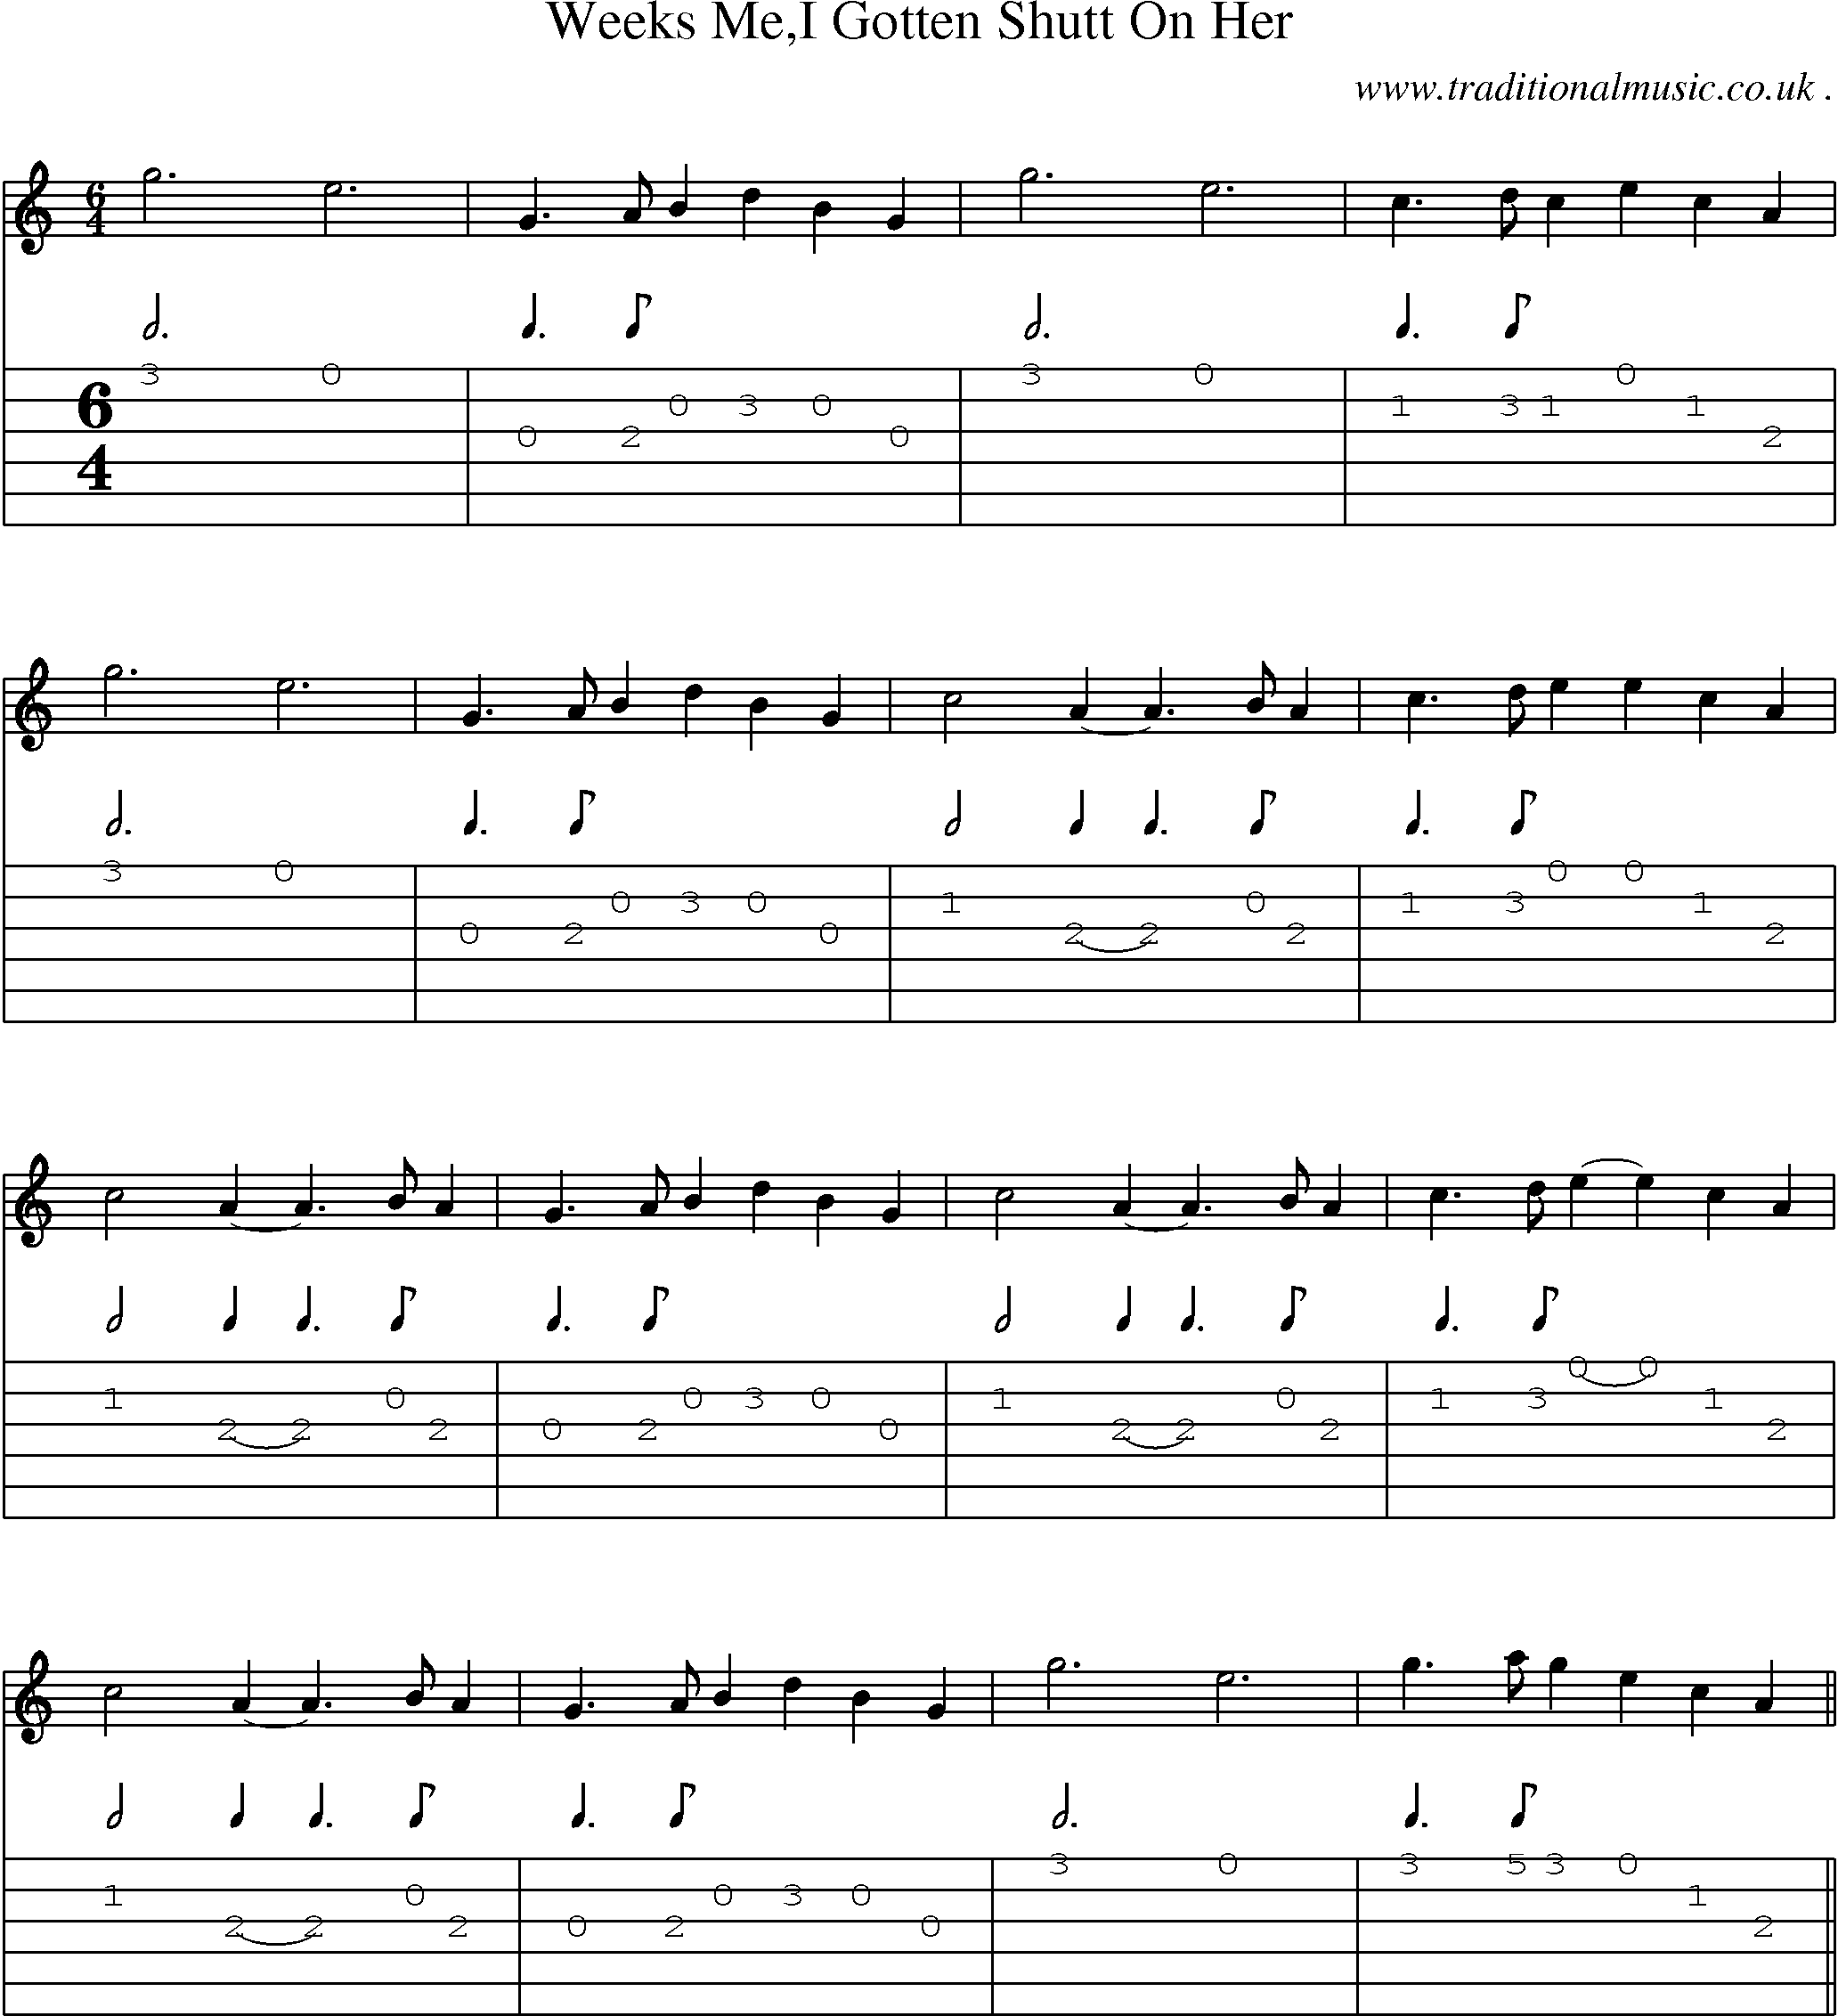 Sheet-Music and Guitar Tabs for Weeks Mei Gotten Shutt On Her